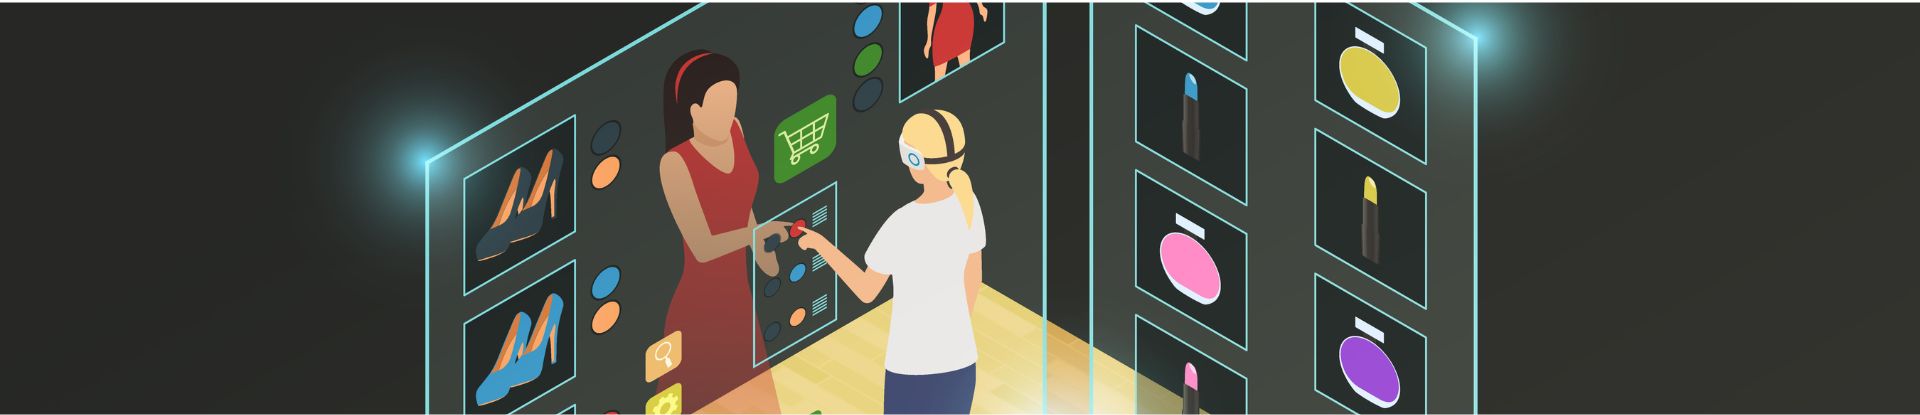 The Rise of Virtual Shopping Stores in Metaverse